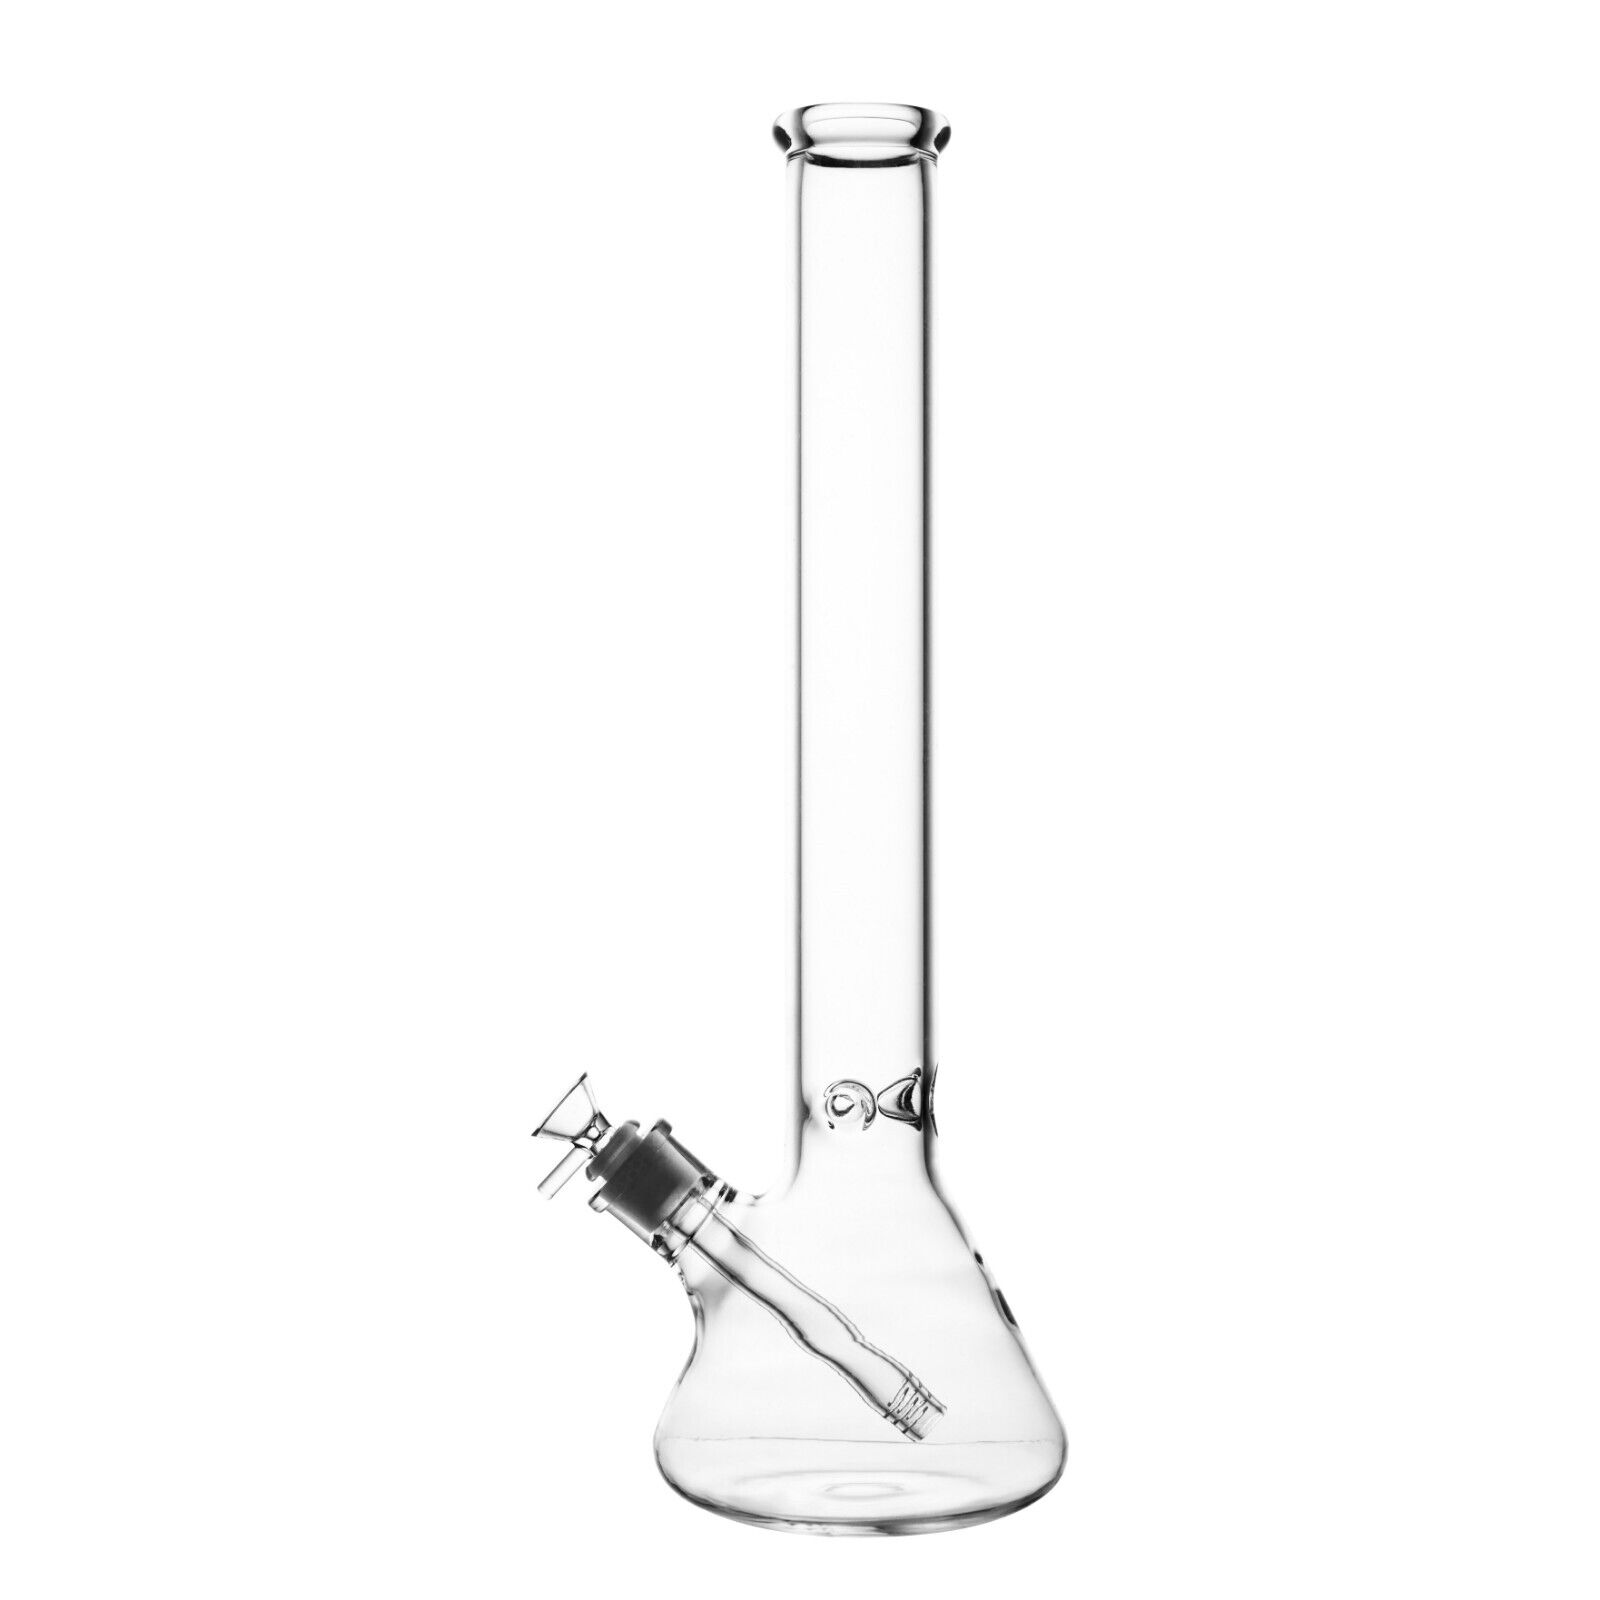 RORA 16 inch Heavy Glass Bong Clear Hookah Water Pipe 14mm Bowl USA